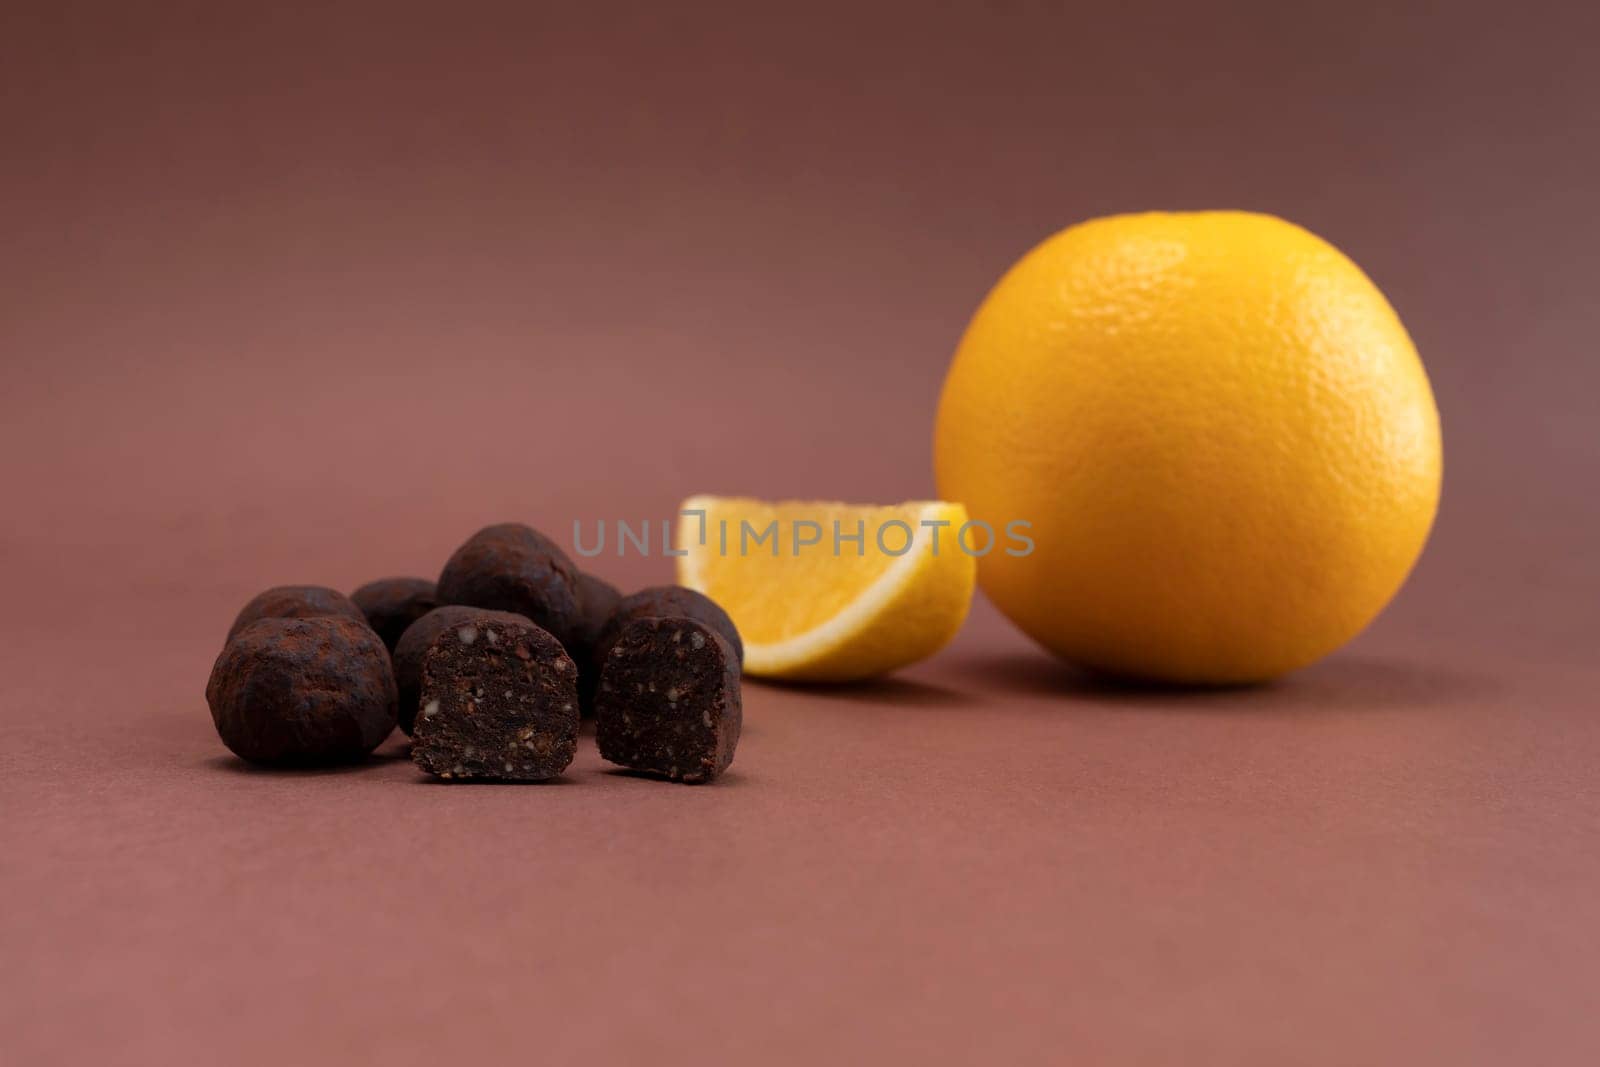 Vegan Raw Sweet Balls made of Organic Cocoa beans with Dry Citrus Fruits on Brown Background. Orange is beside. Horizontal Plane. Healthy Food, Dessert. High quality photo